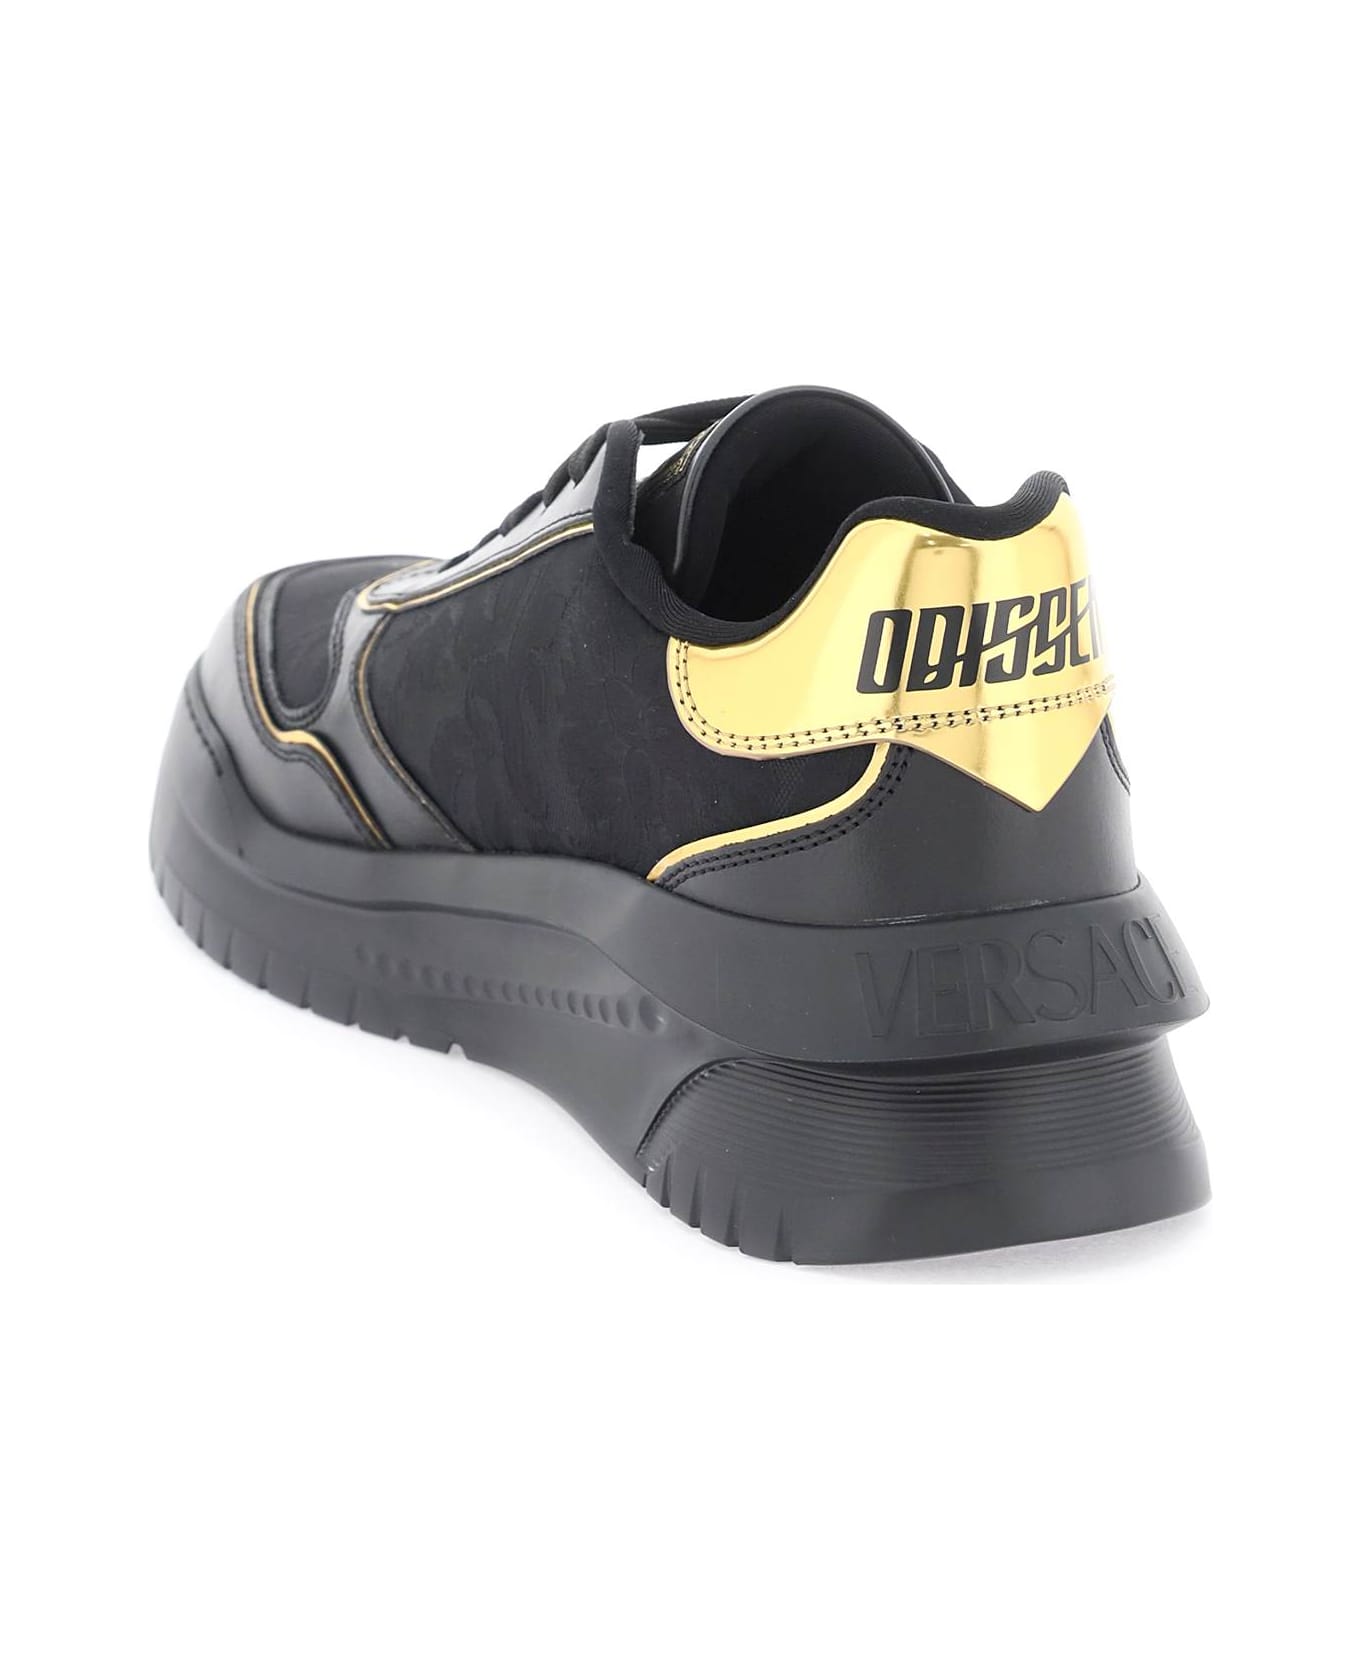 Versace 'odissea' Chunky Leather Sneakers - BLACK GOLD (Black) スニーカー